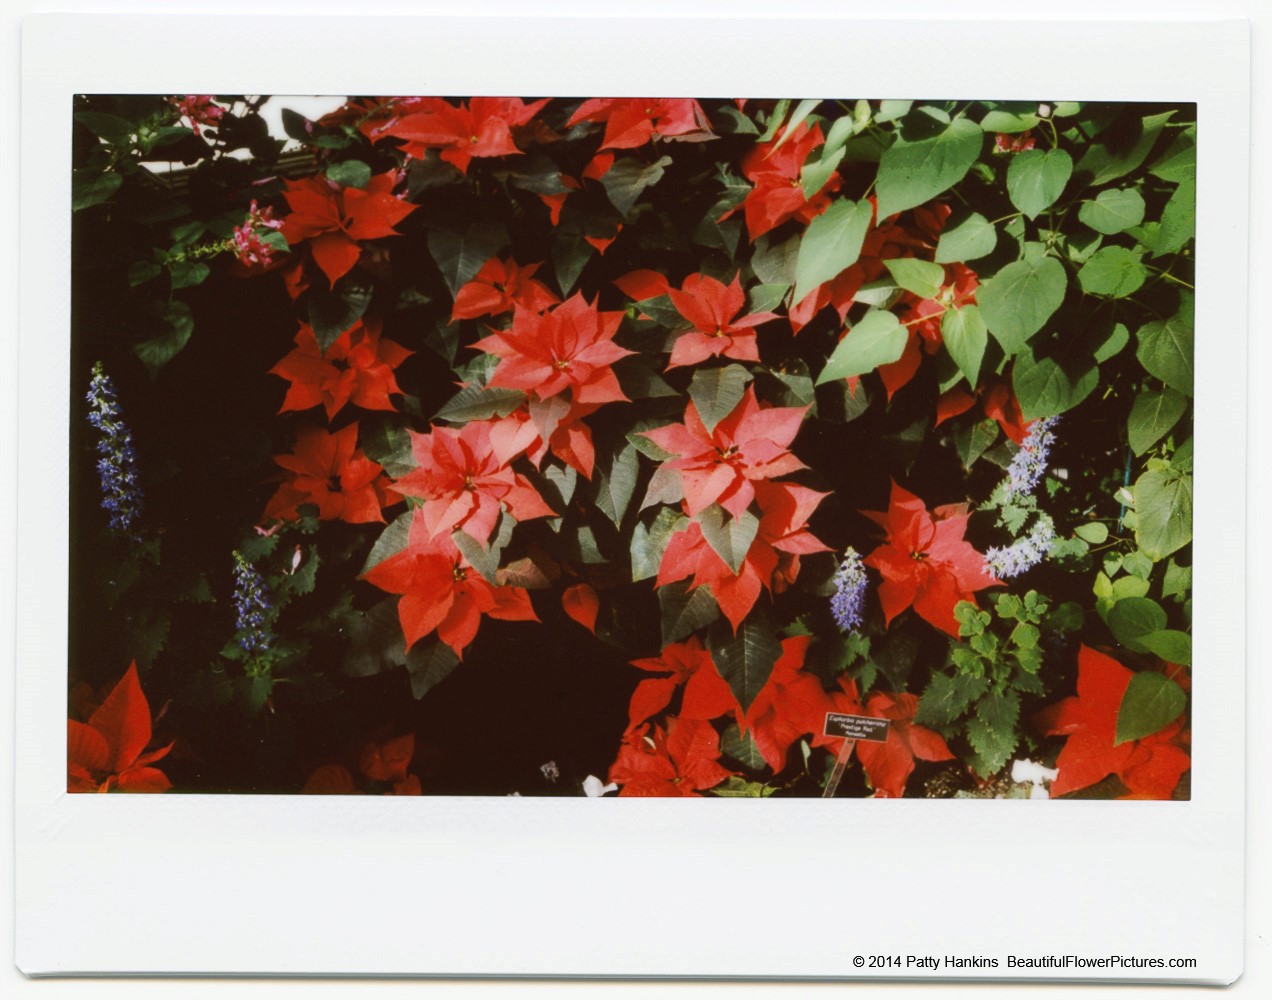 Instax: Christmas at Brookside Gardens